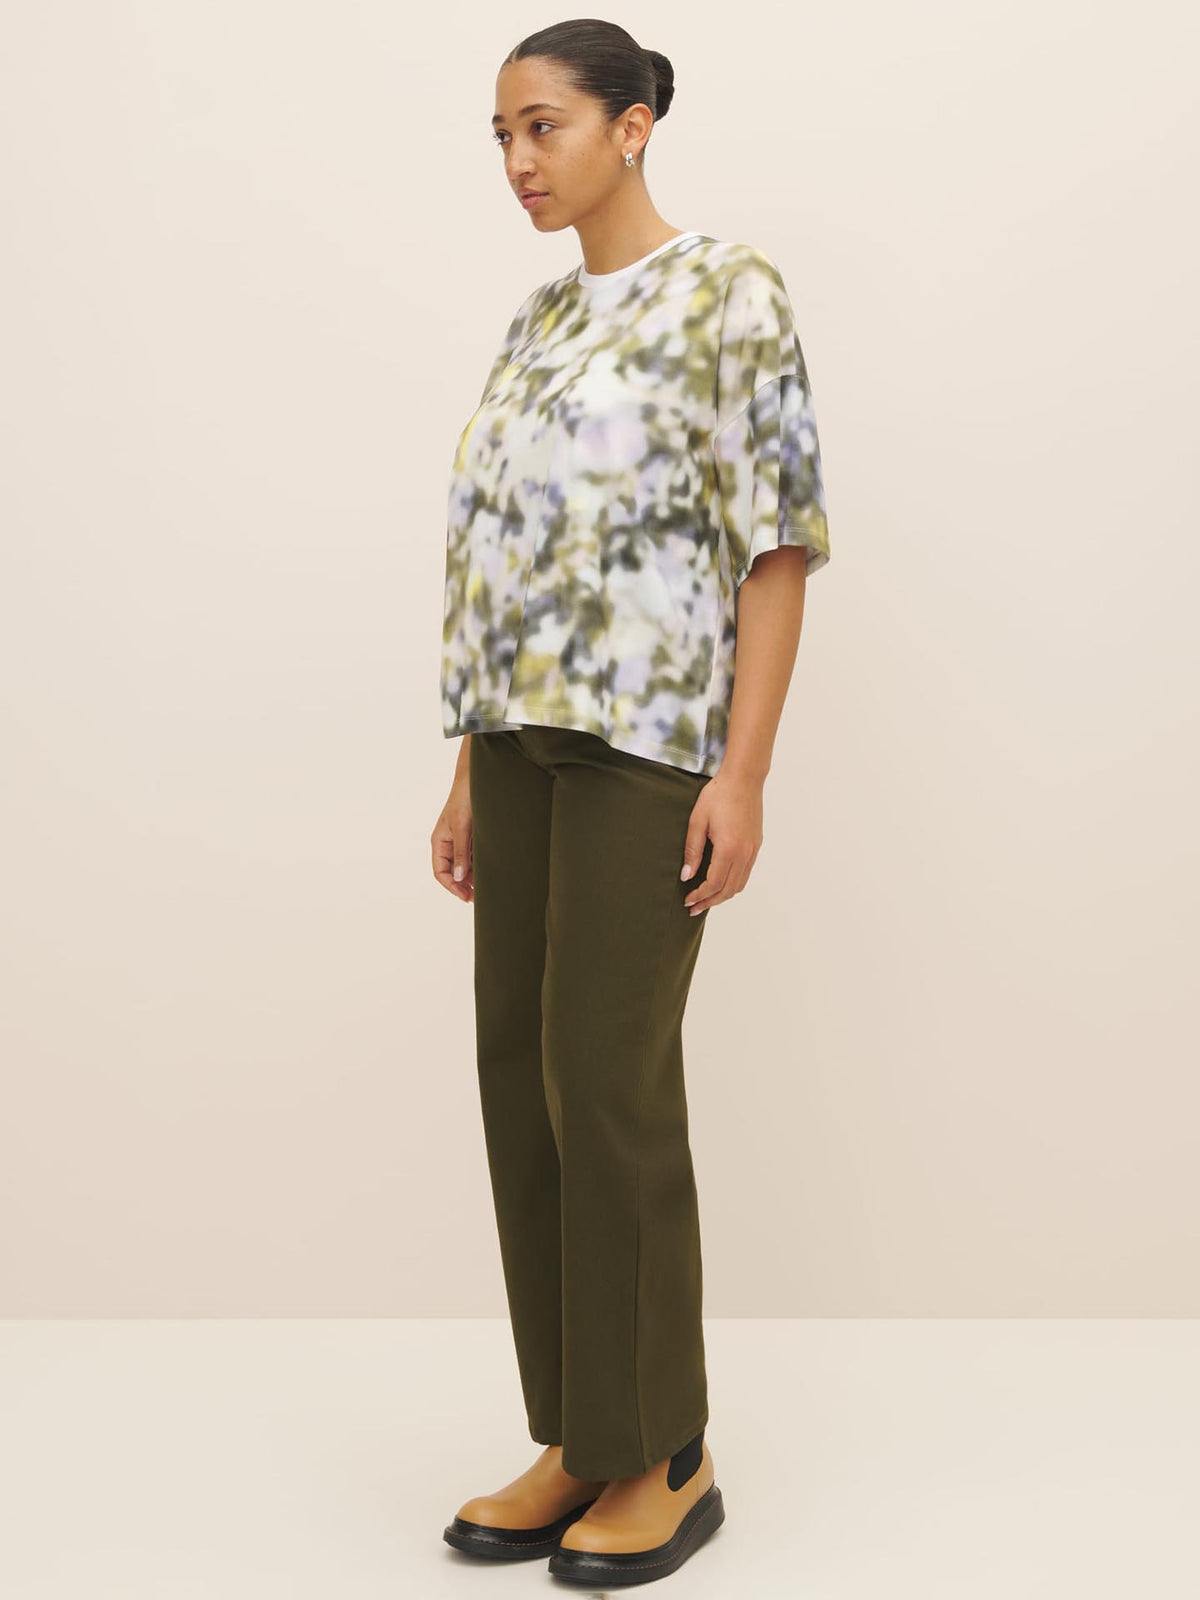 The model is wearing a Komorebi Print Tee from Kowtow with an oversized fit.